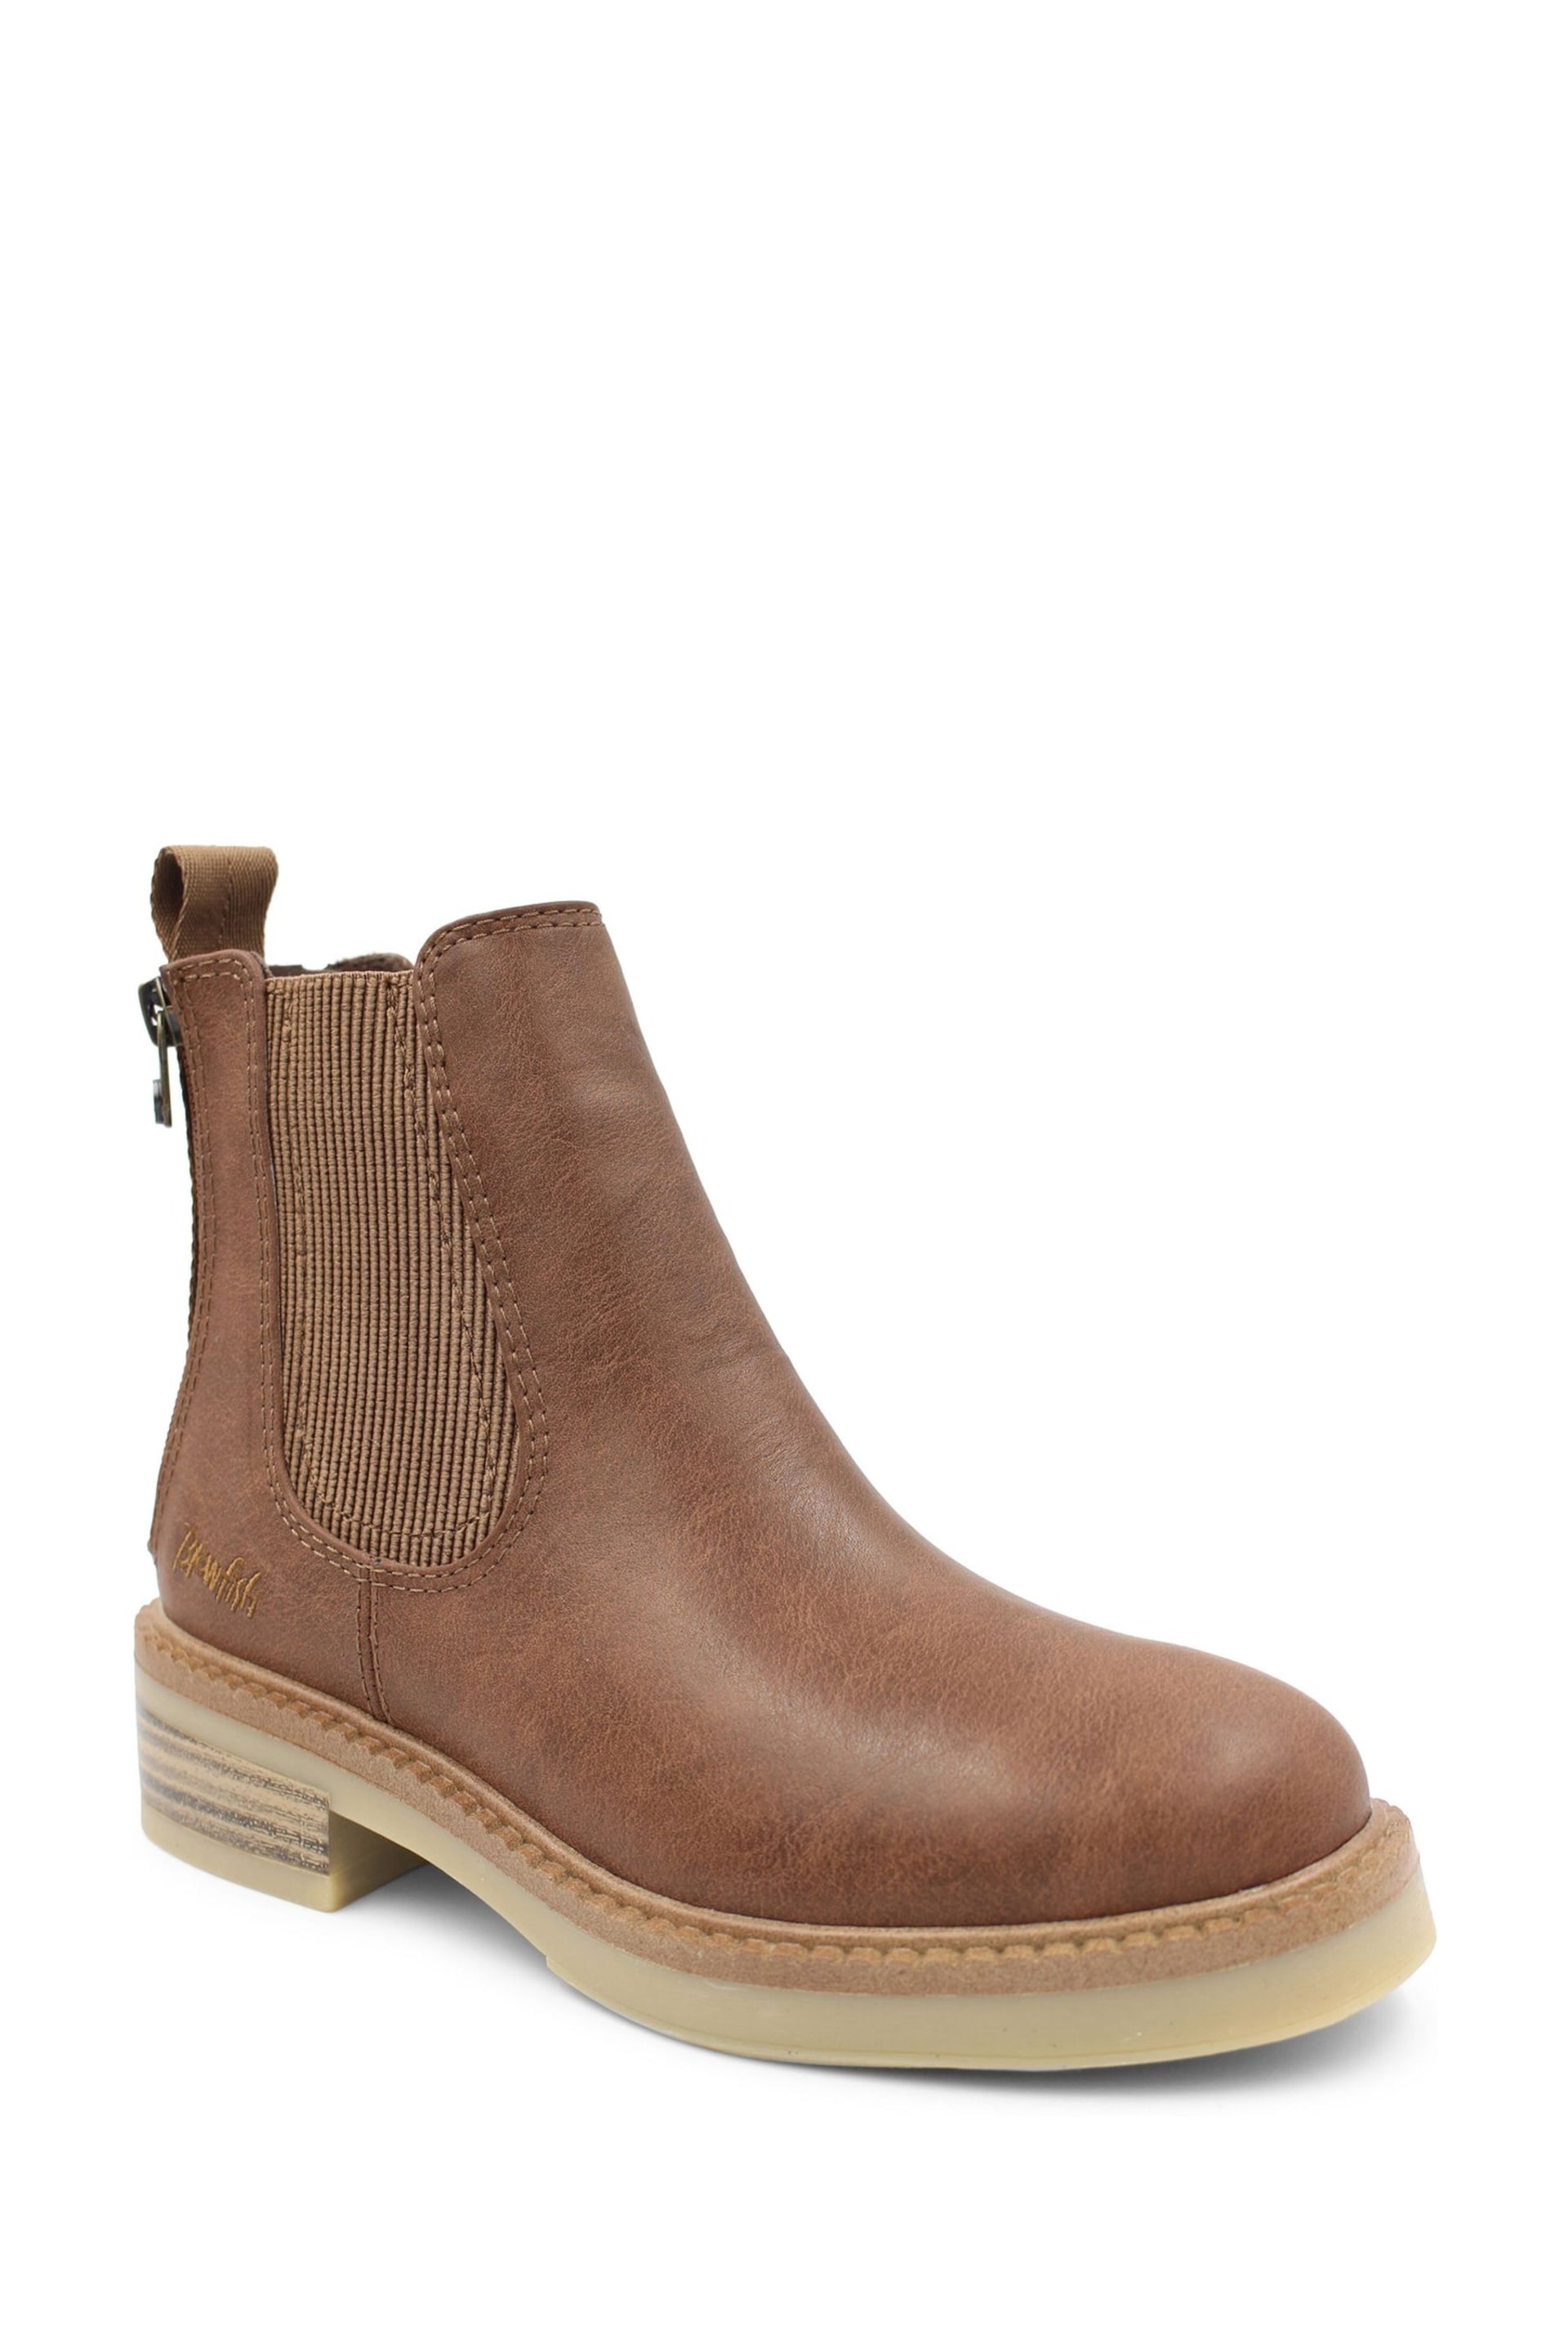 Blowfish Malibu Womens Natural Vedder Back Zip Ankle Chelsea Boots - Image 2 of 3